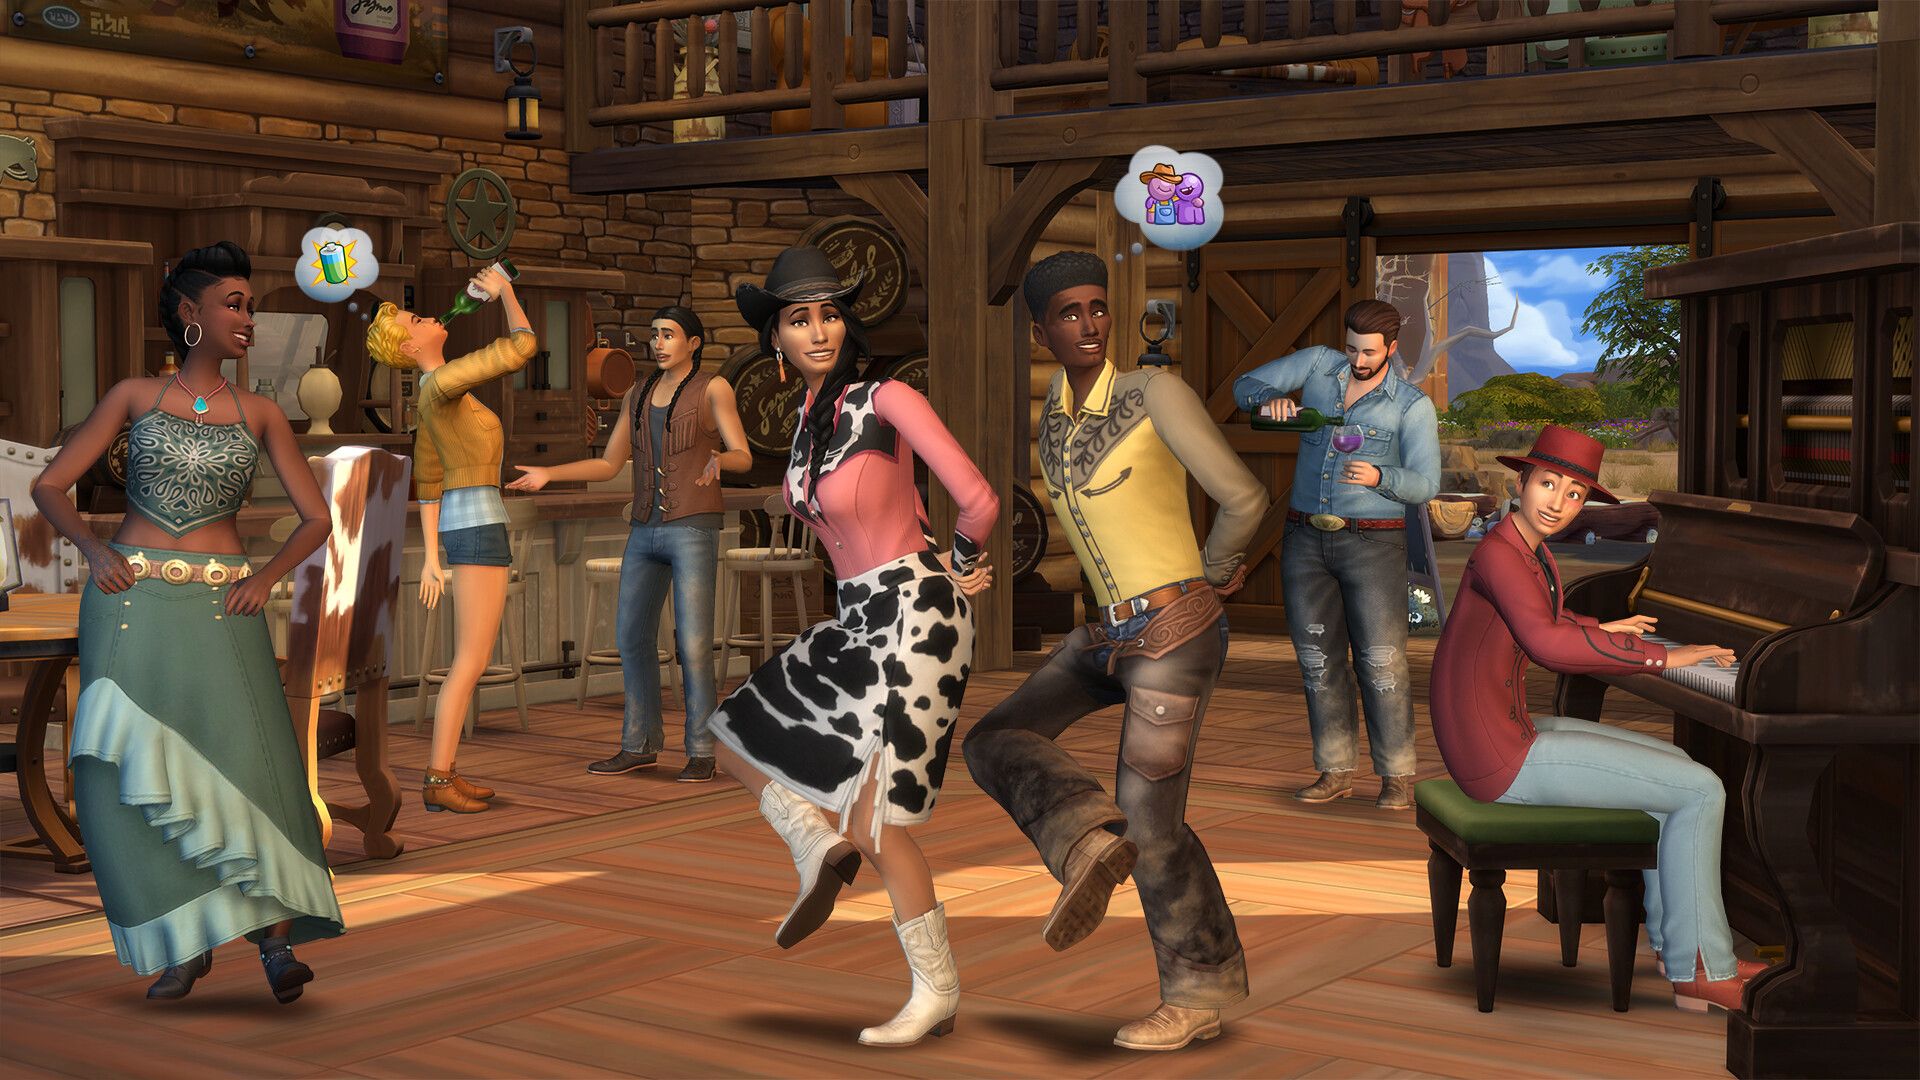 The Sims 4 For Rent Expansion Pack Release Date and Pre-Order Bonuses